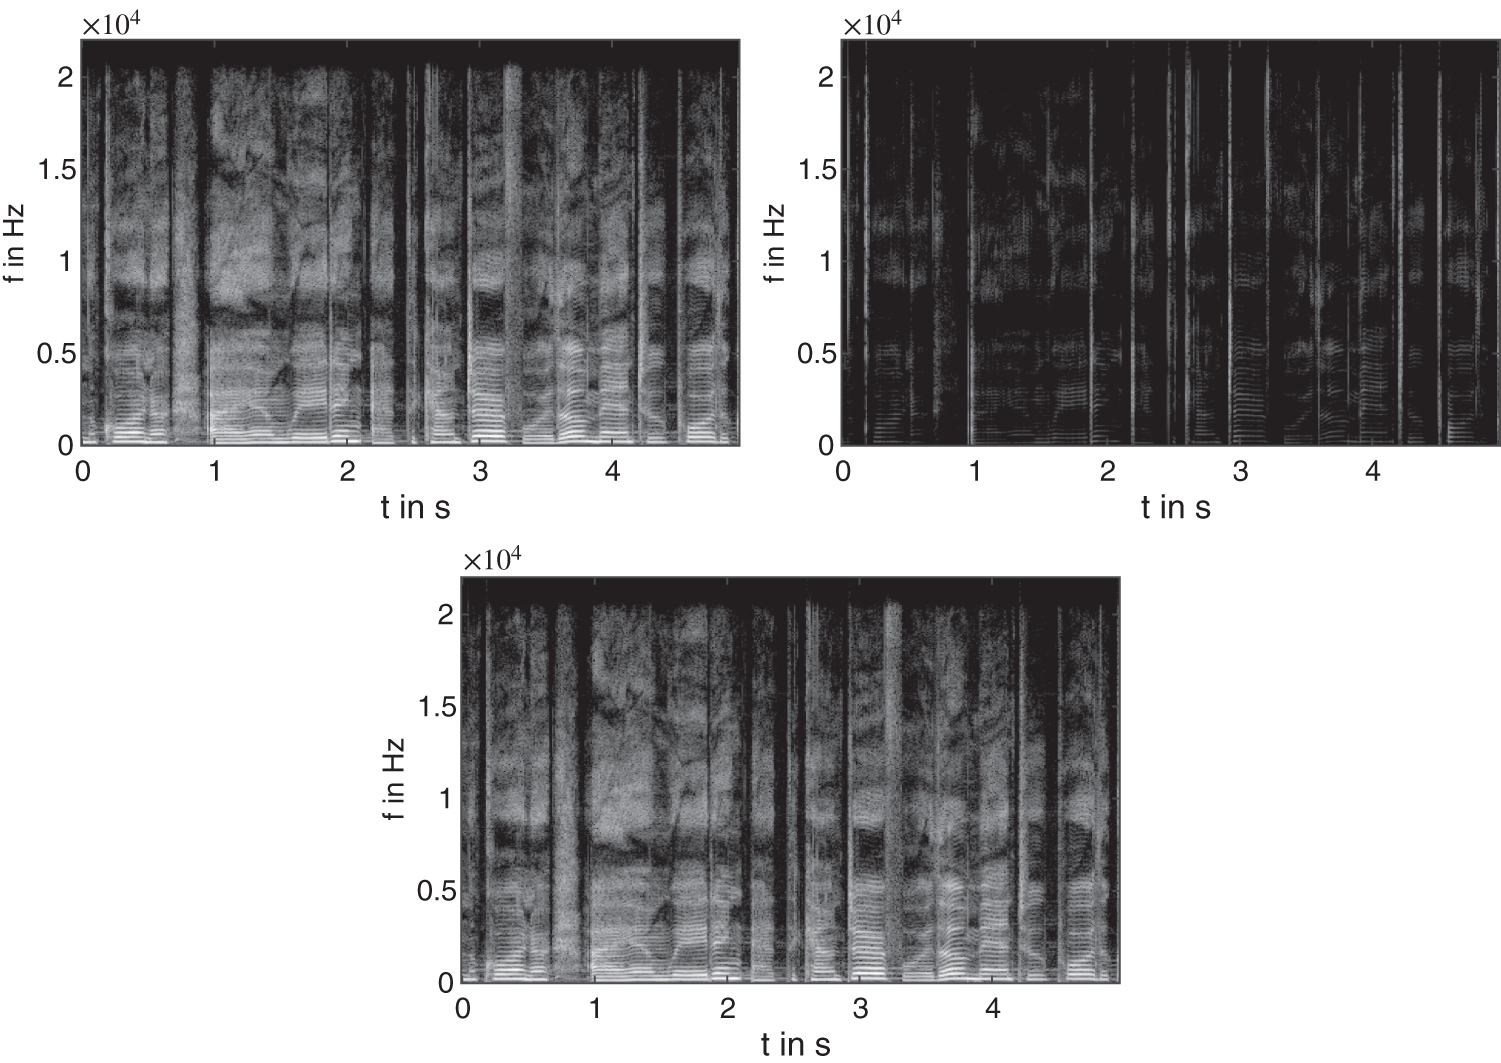 Schematic illustration of spectrogram of a female singing voice.